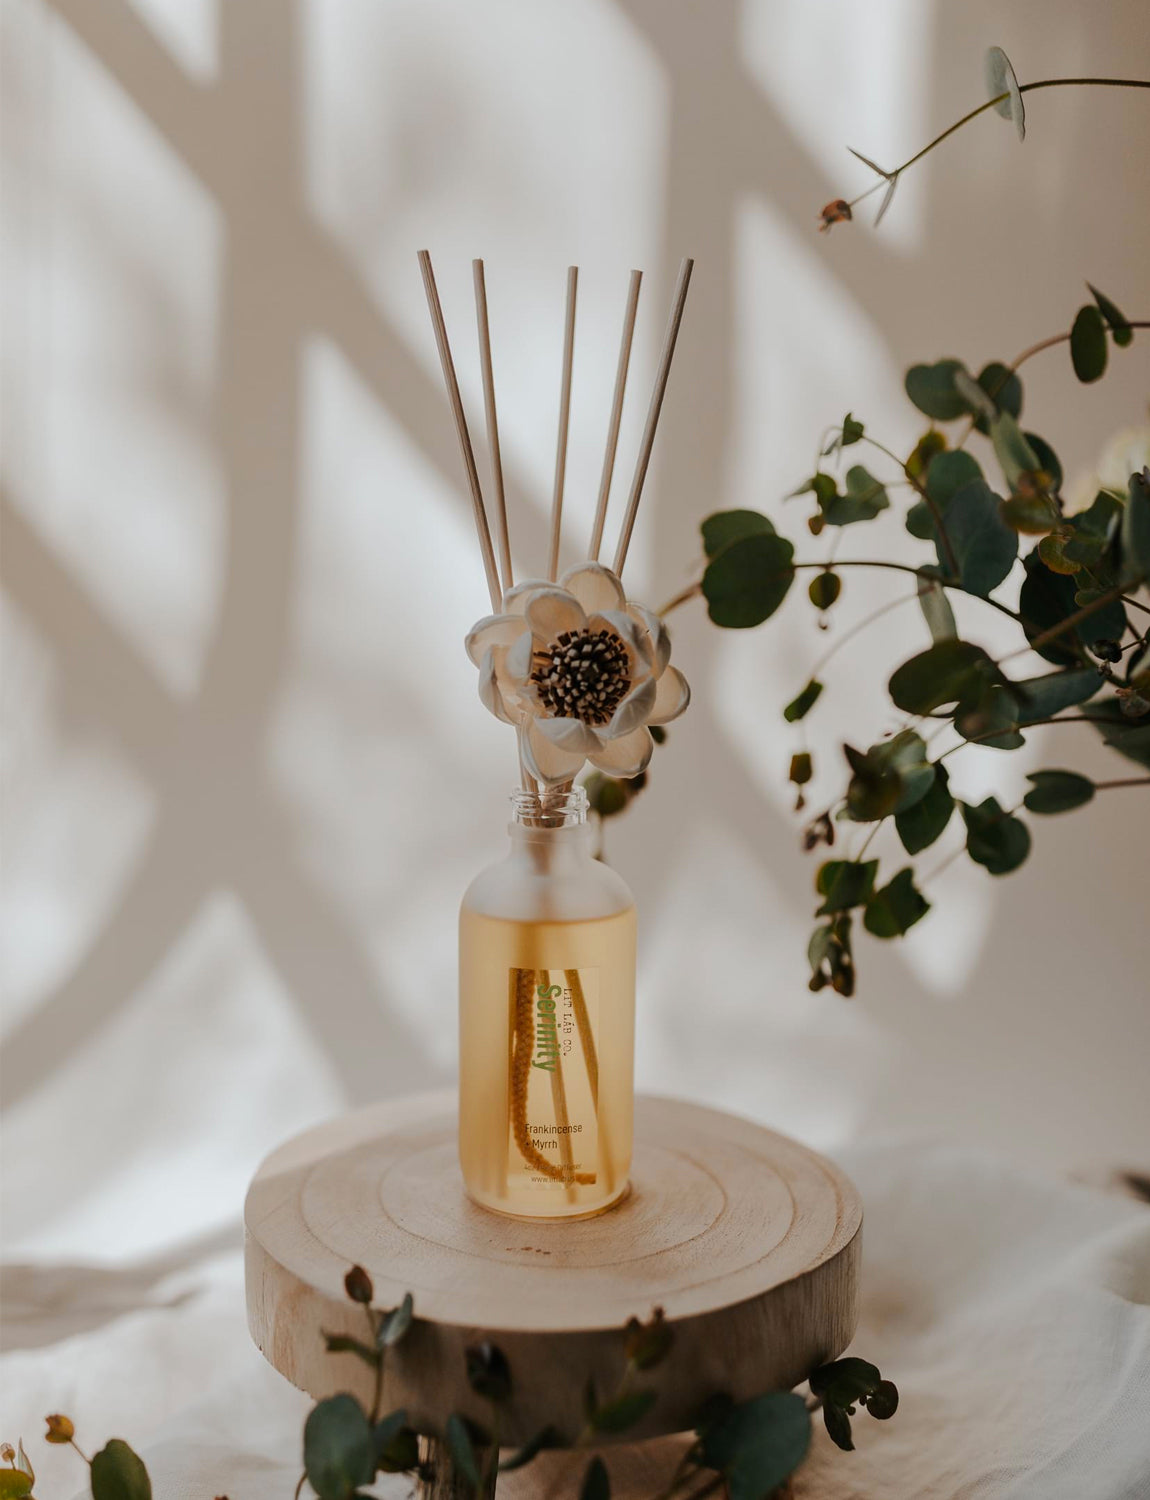 Lit Láb Co. Flororal Reed Diffuser, Serenity